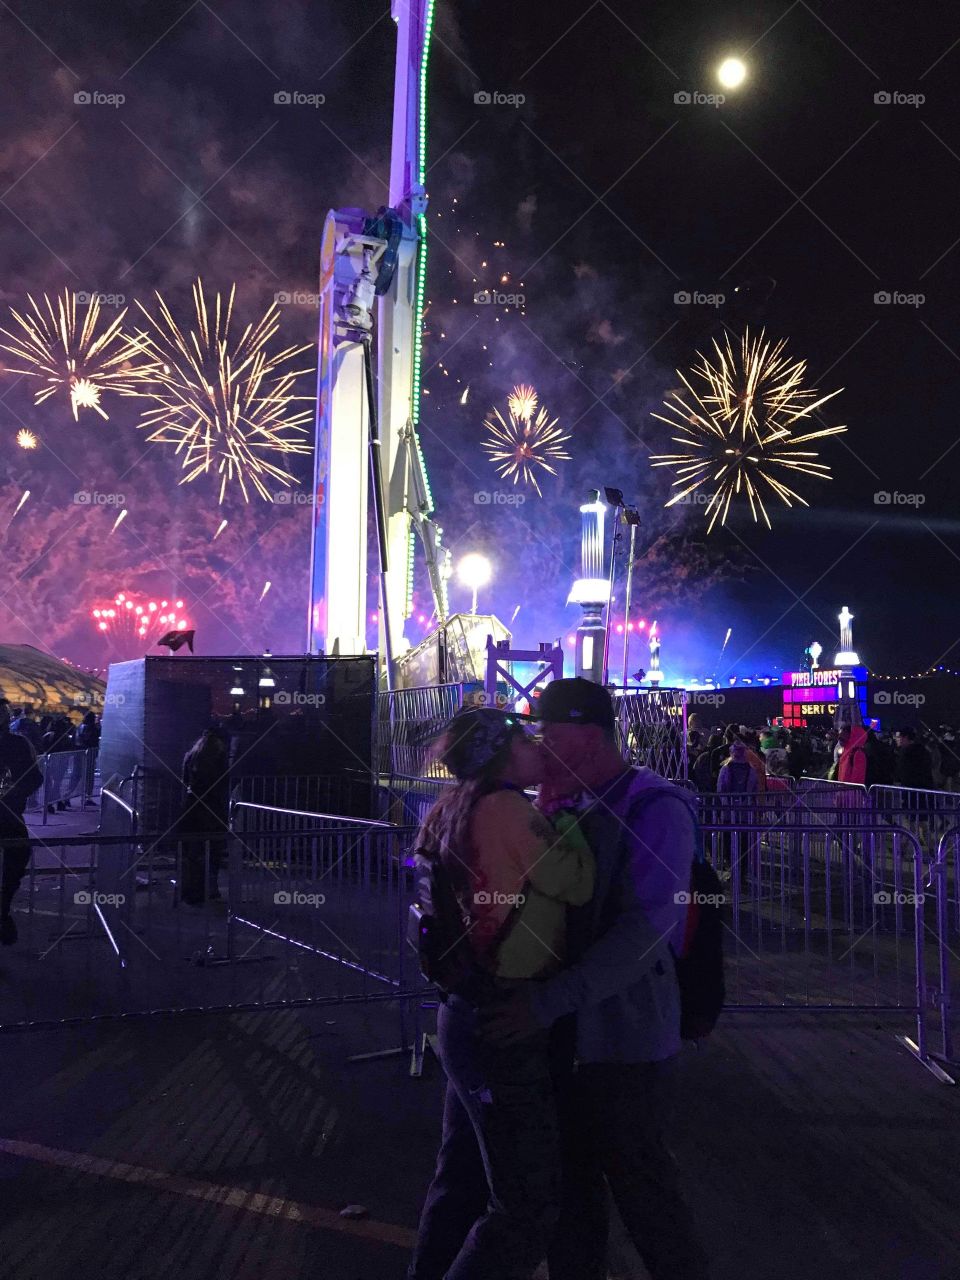 Kissing under the electric sky